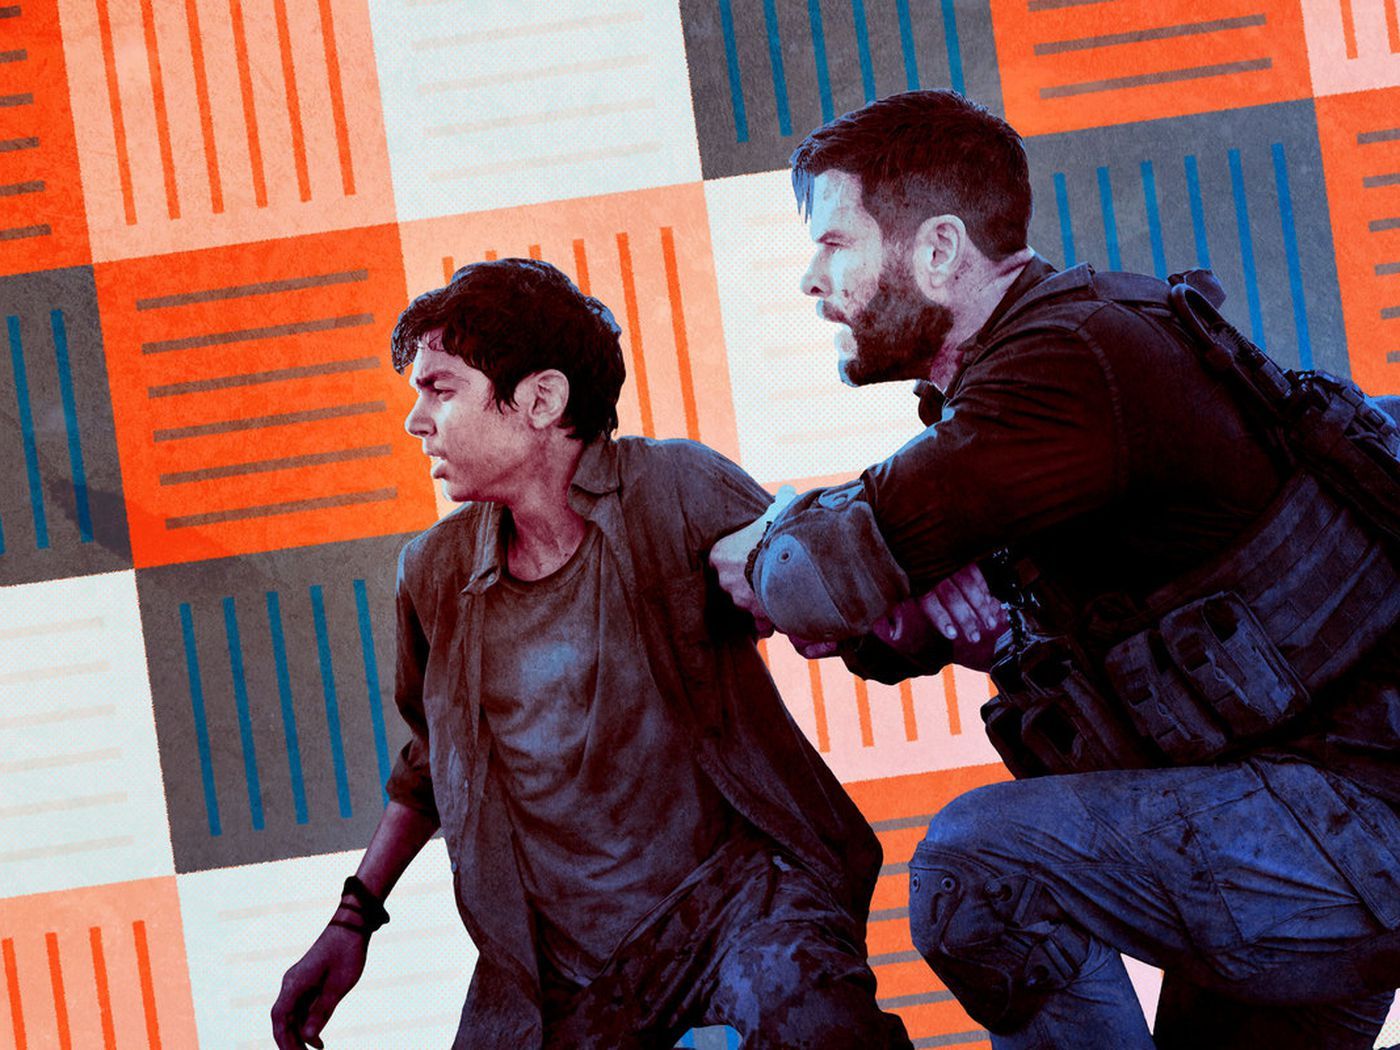 If You Love Gnarly Action Sequences, You Will Love 'Extraction'